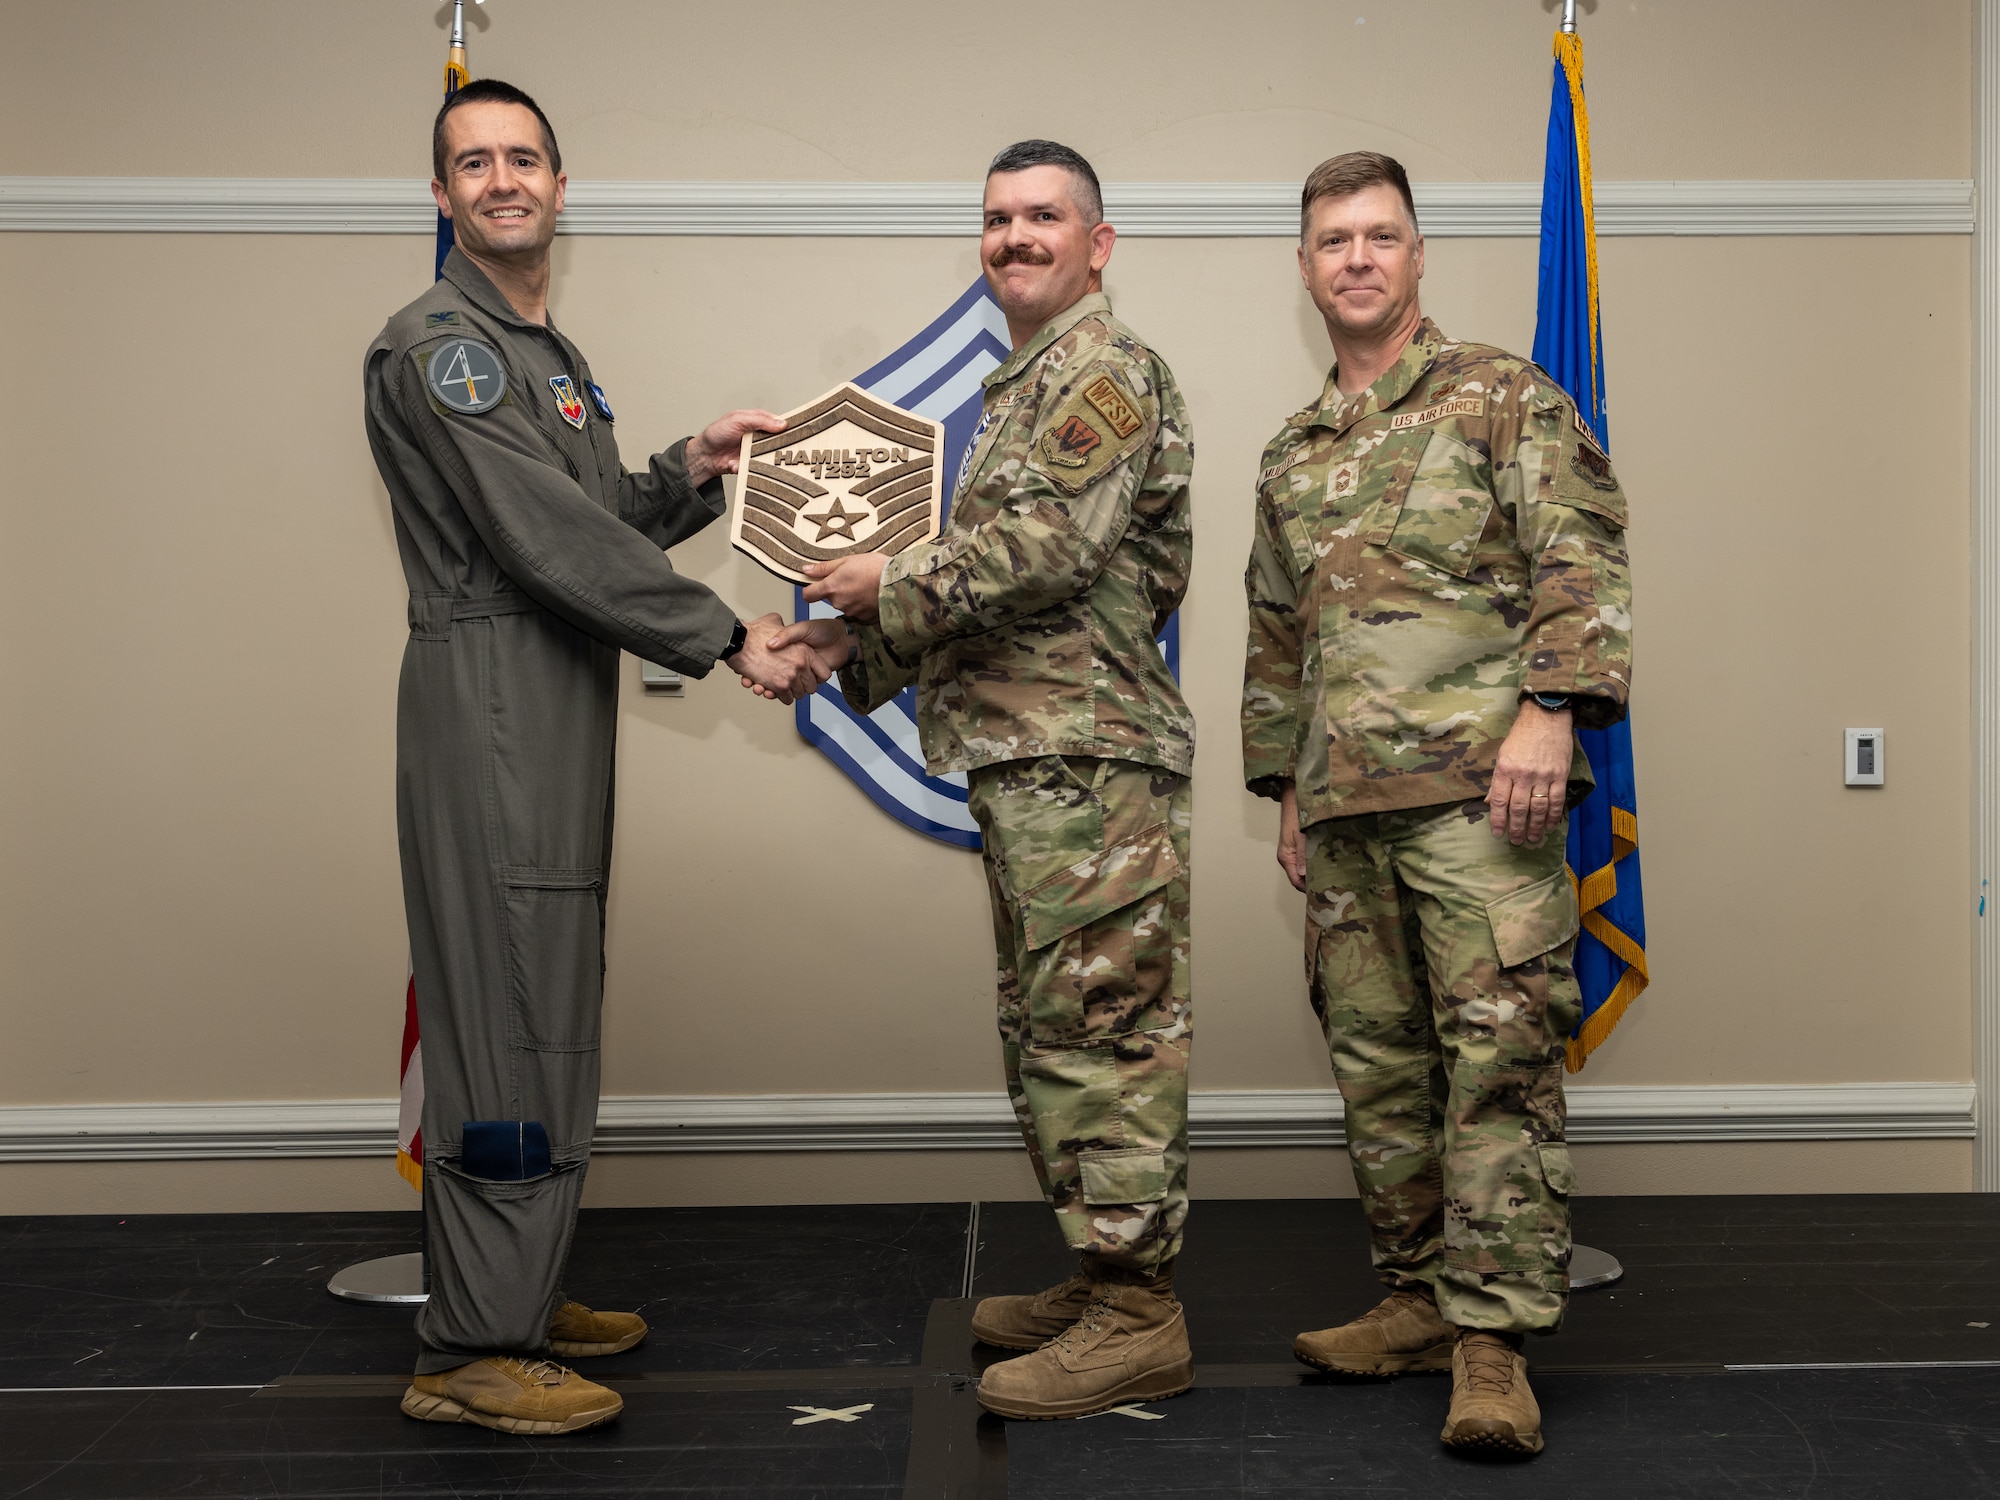 U.S Air Force Col. Morgan Lohse, 4th Fighter Wing commander (left), and Chief Master Sgt. Edward Mueller, Mission support Group senior enlisted leader, presents a plaque to Senior Master Sgt. select Mary Staats Walker (center), law office superintendent, during a Senior Master Sergeant release ceremony at Seymour Johnson Air Force Base, North Carolina, March 28, 2024. The ceremony allowed wing leadership, family and friends to recognize the base’s newest Senior Master Sergeant selects. (U.S. Air Force photo by Airman Megan Cusmano)